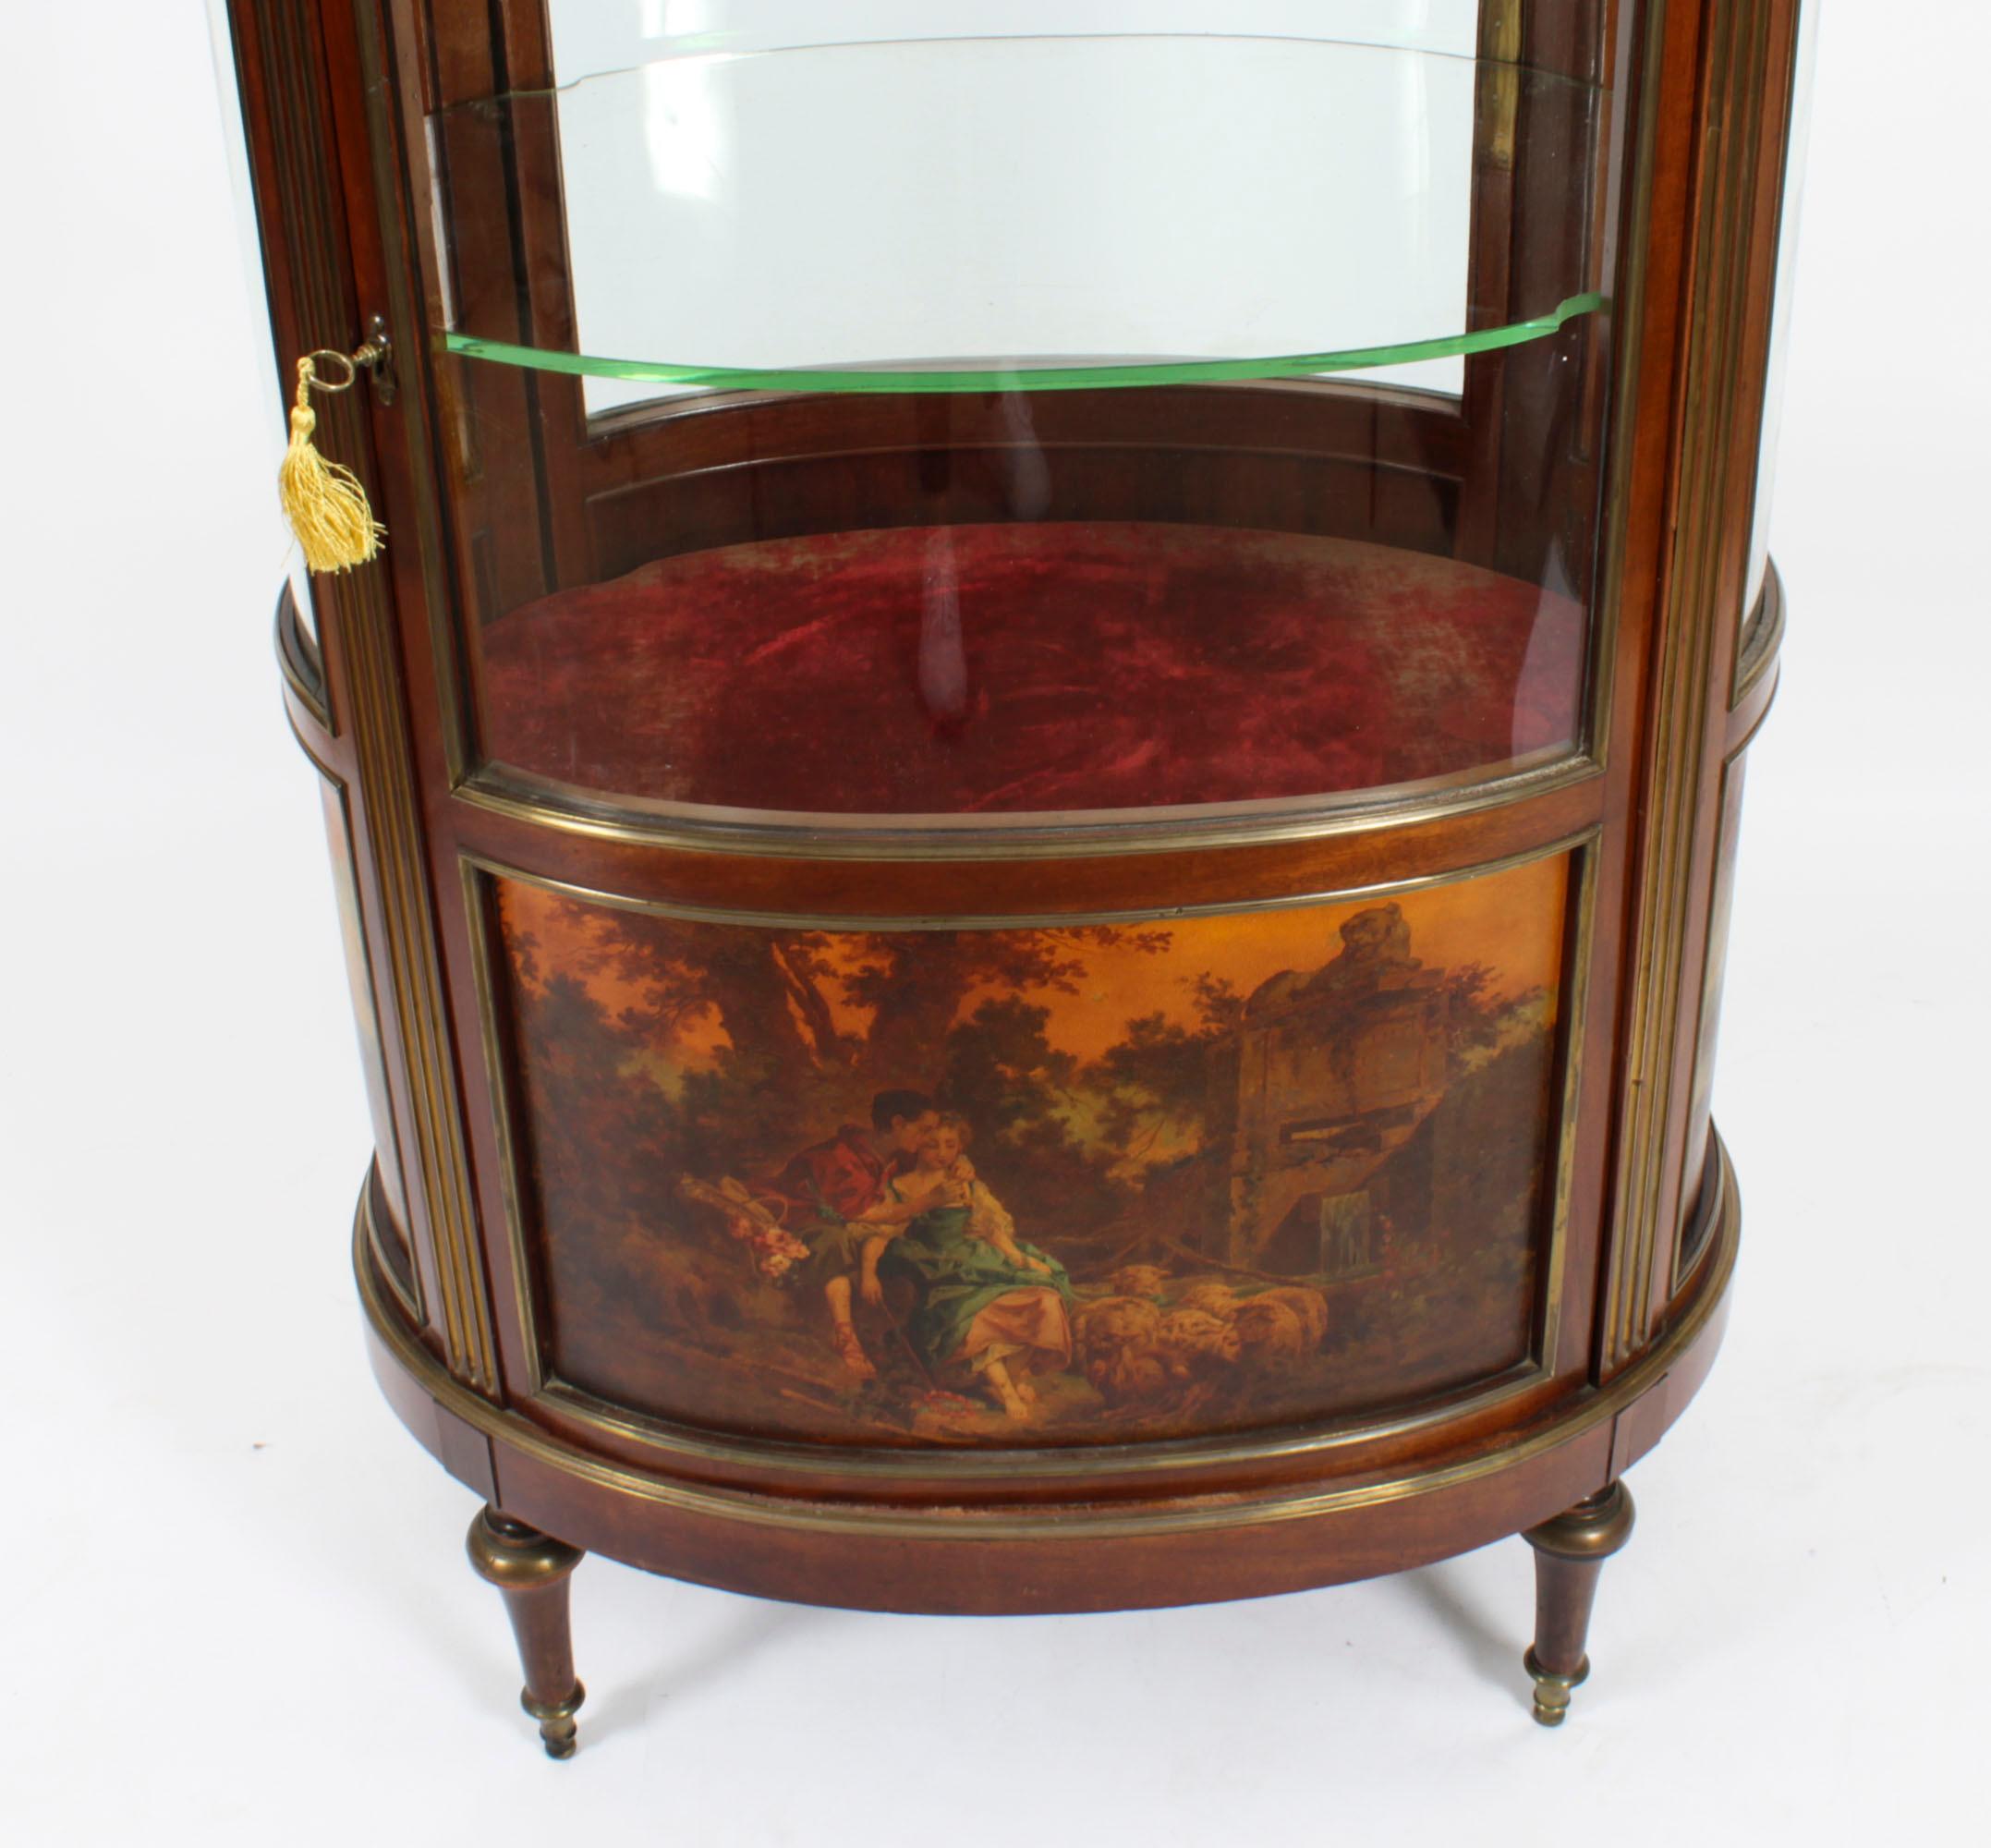 Antique French Oval Free Standing Vernis Martin Cabinet Vitrine, 19th Century For Sale 1